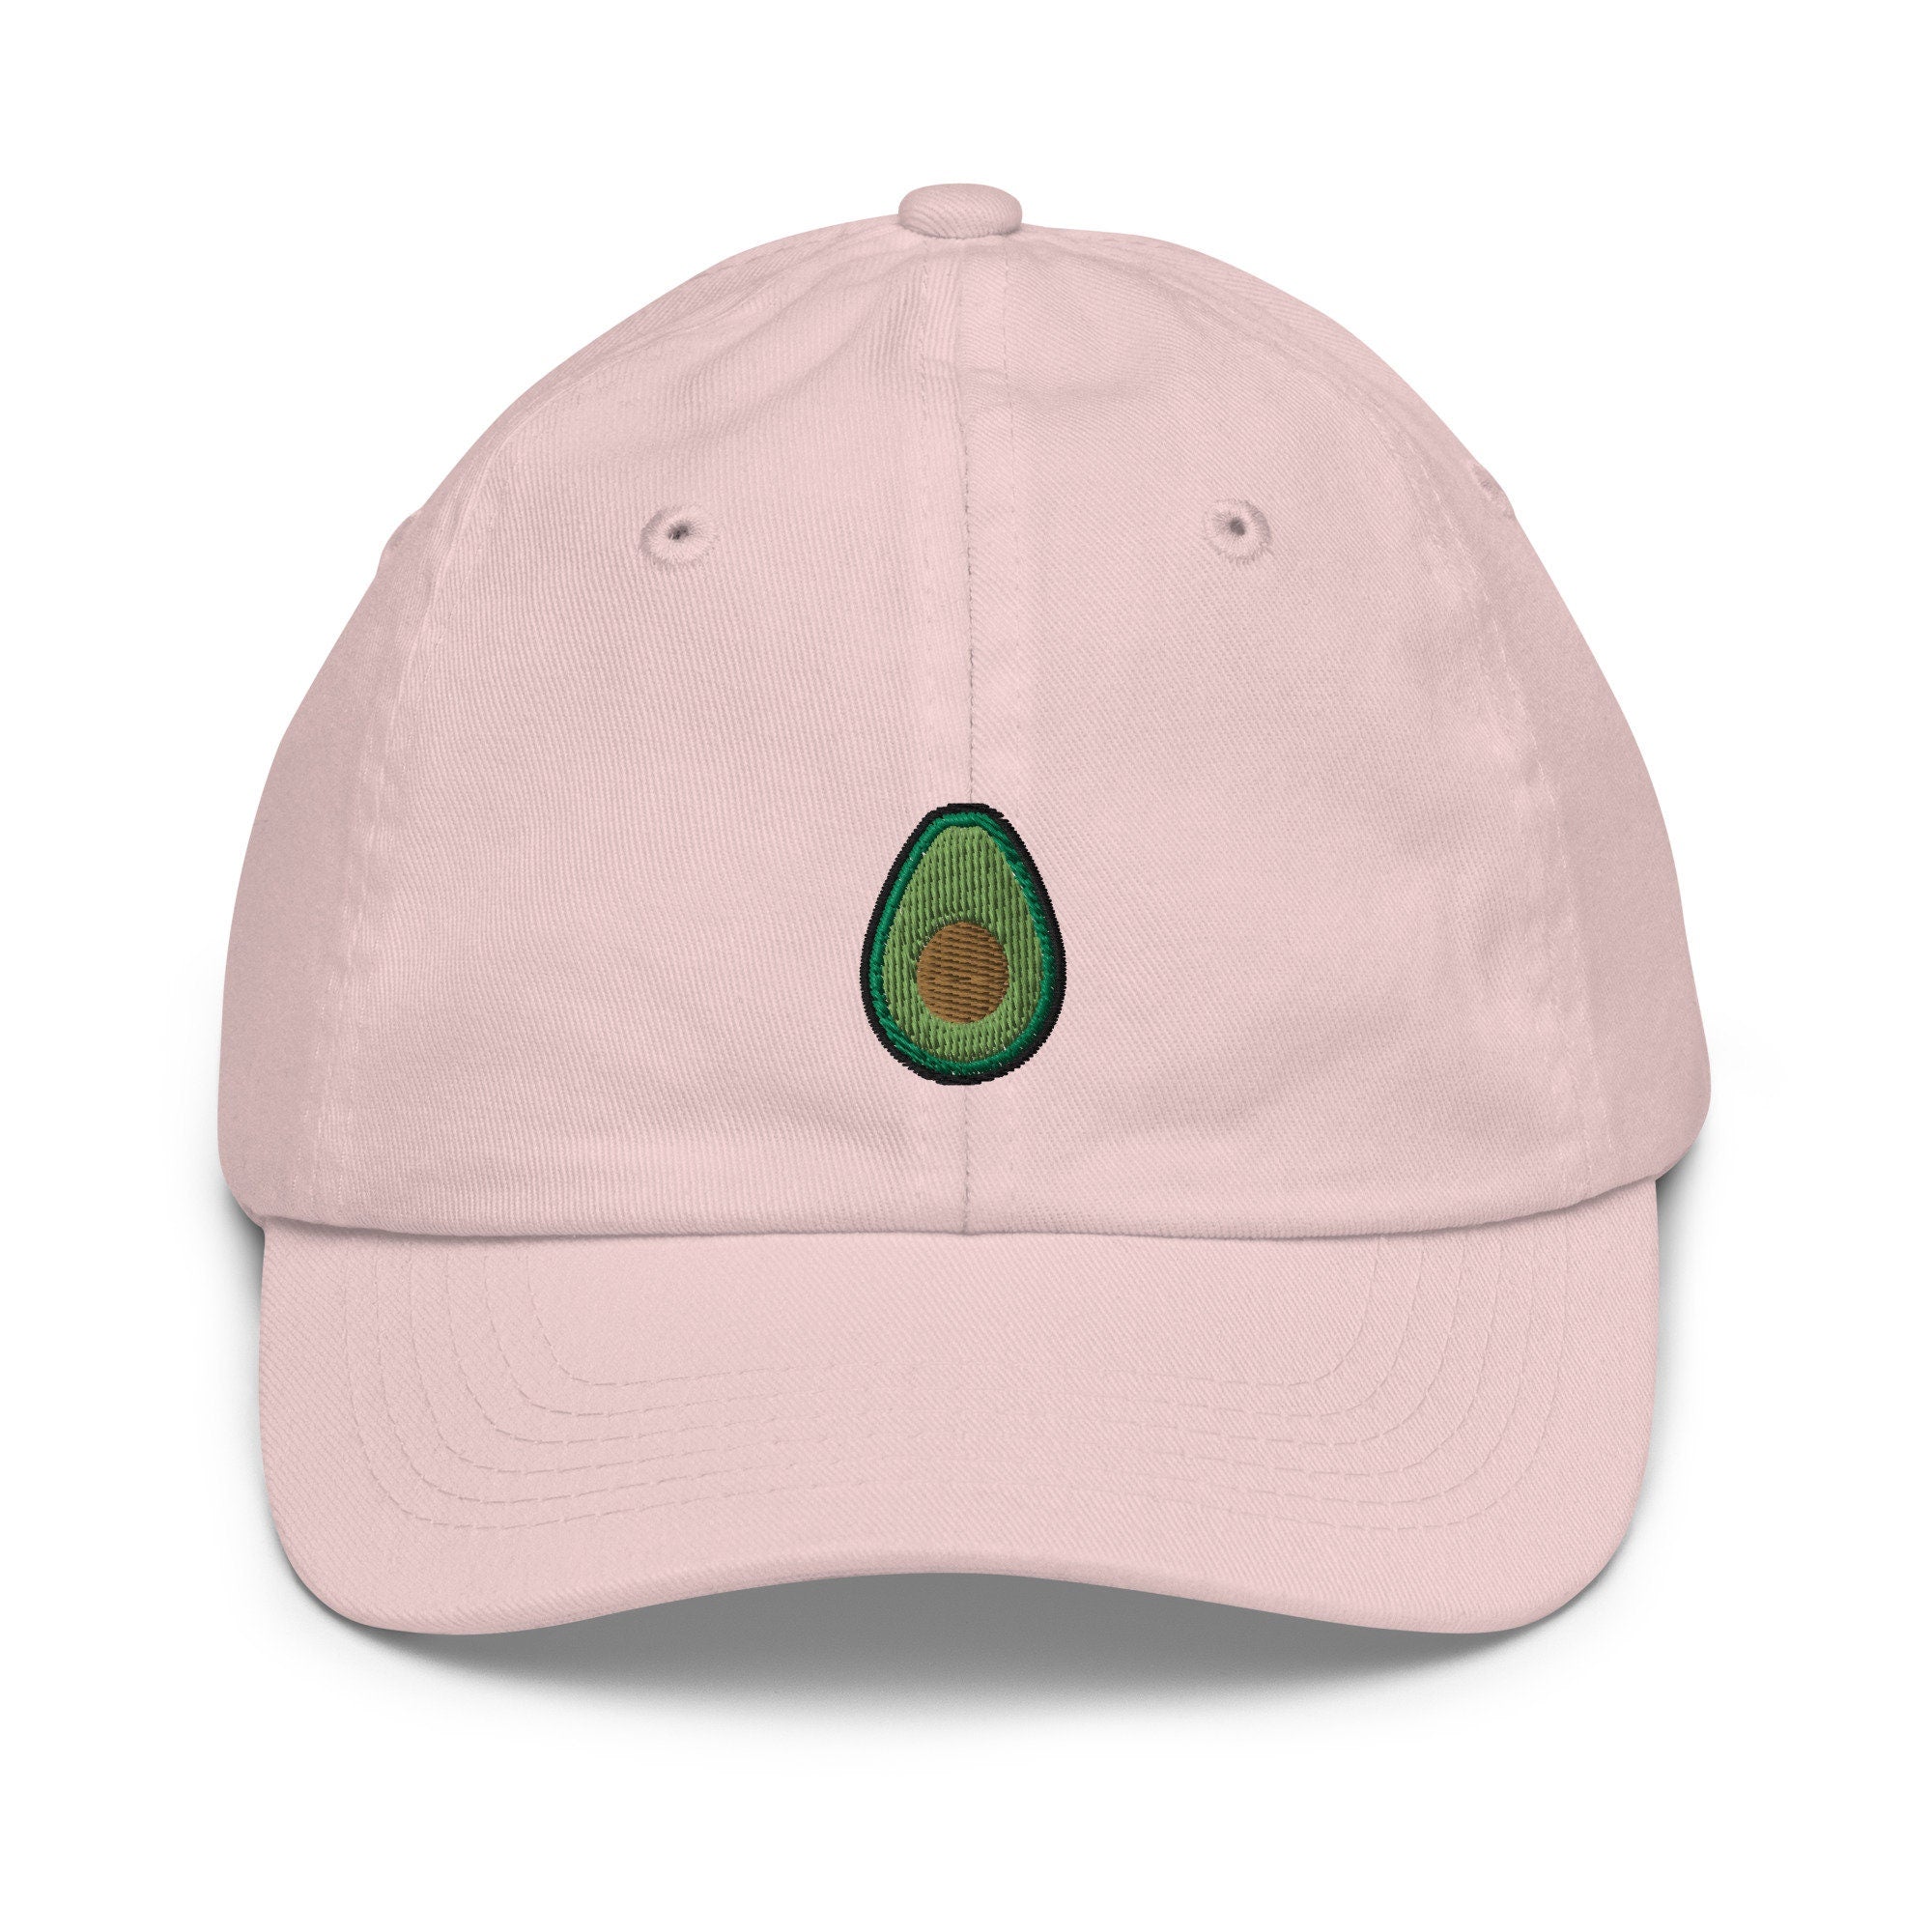 Kids Avocado Youth Baseball Cap, Embroidered Kids Hat, Childrens Hat Gift - Multiple Colors